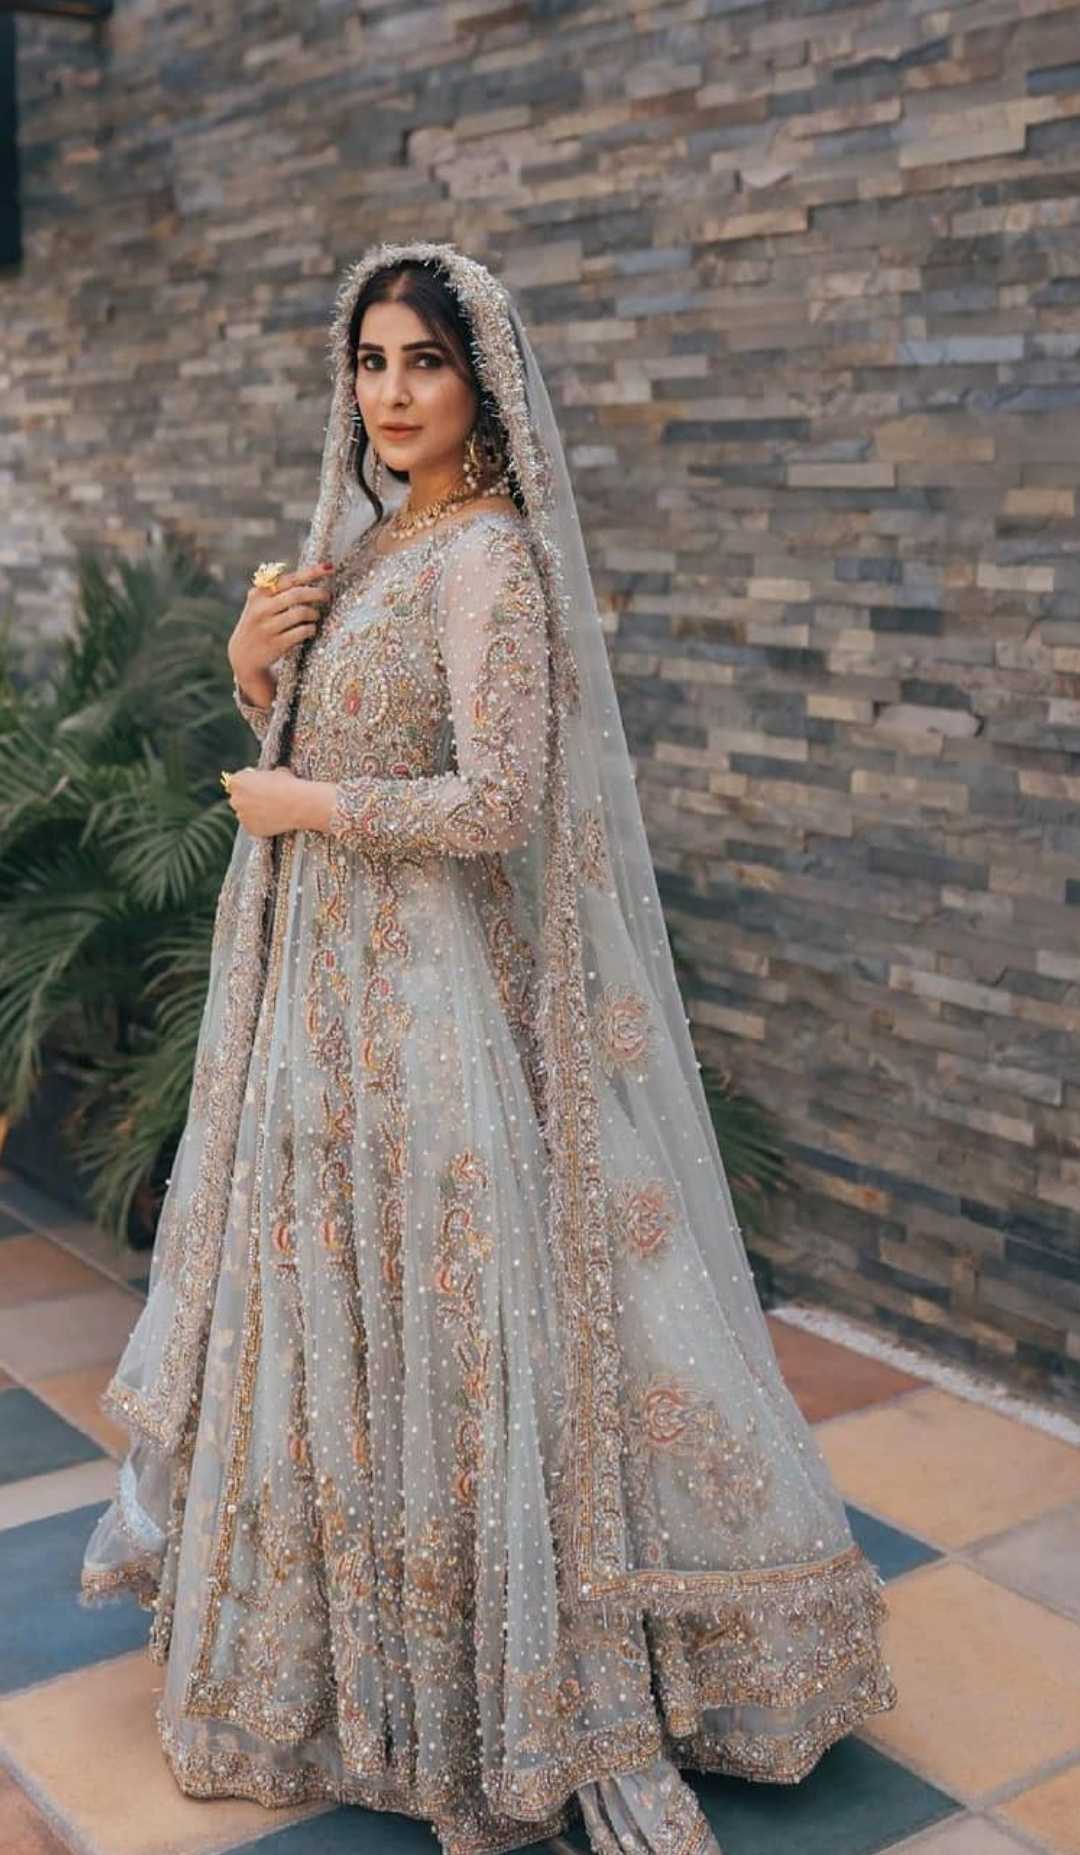 Areeba Habib Is A Vision To Behold In a Bridal Attire - Lens